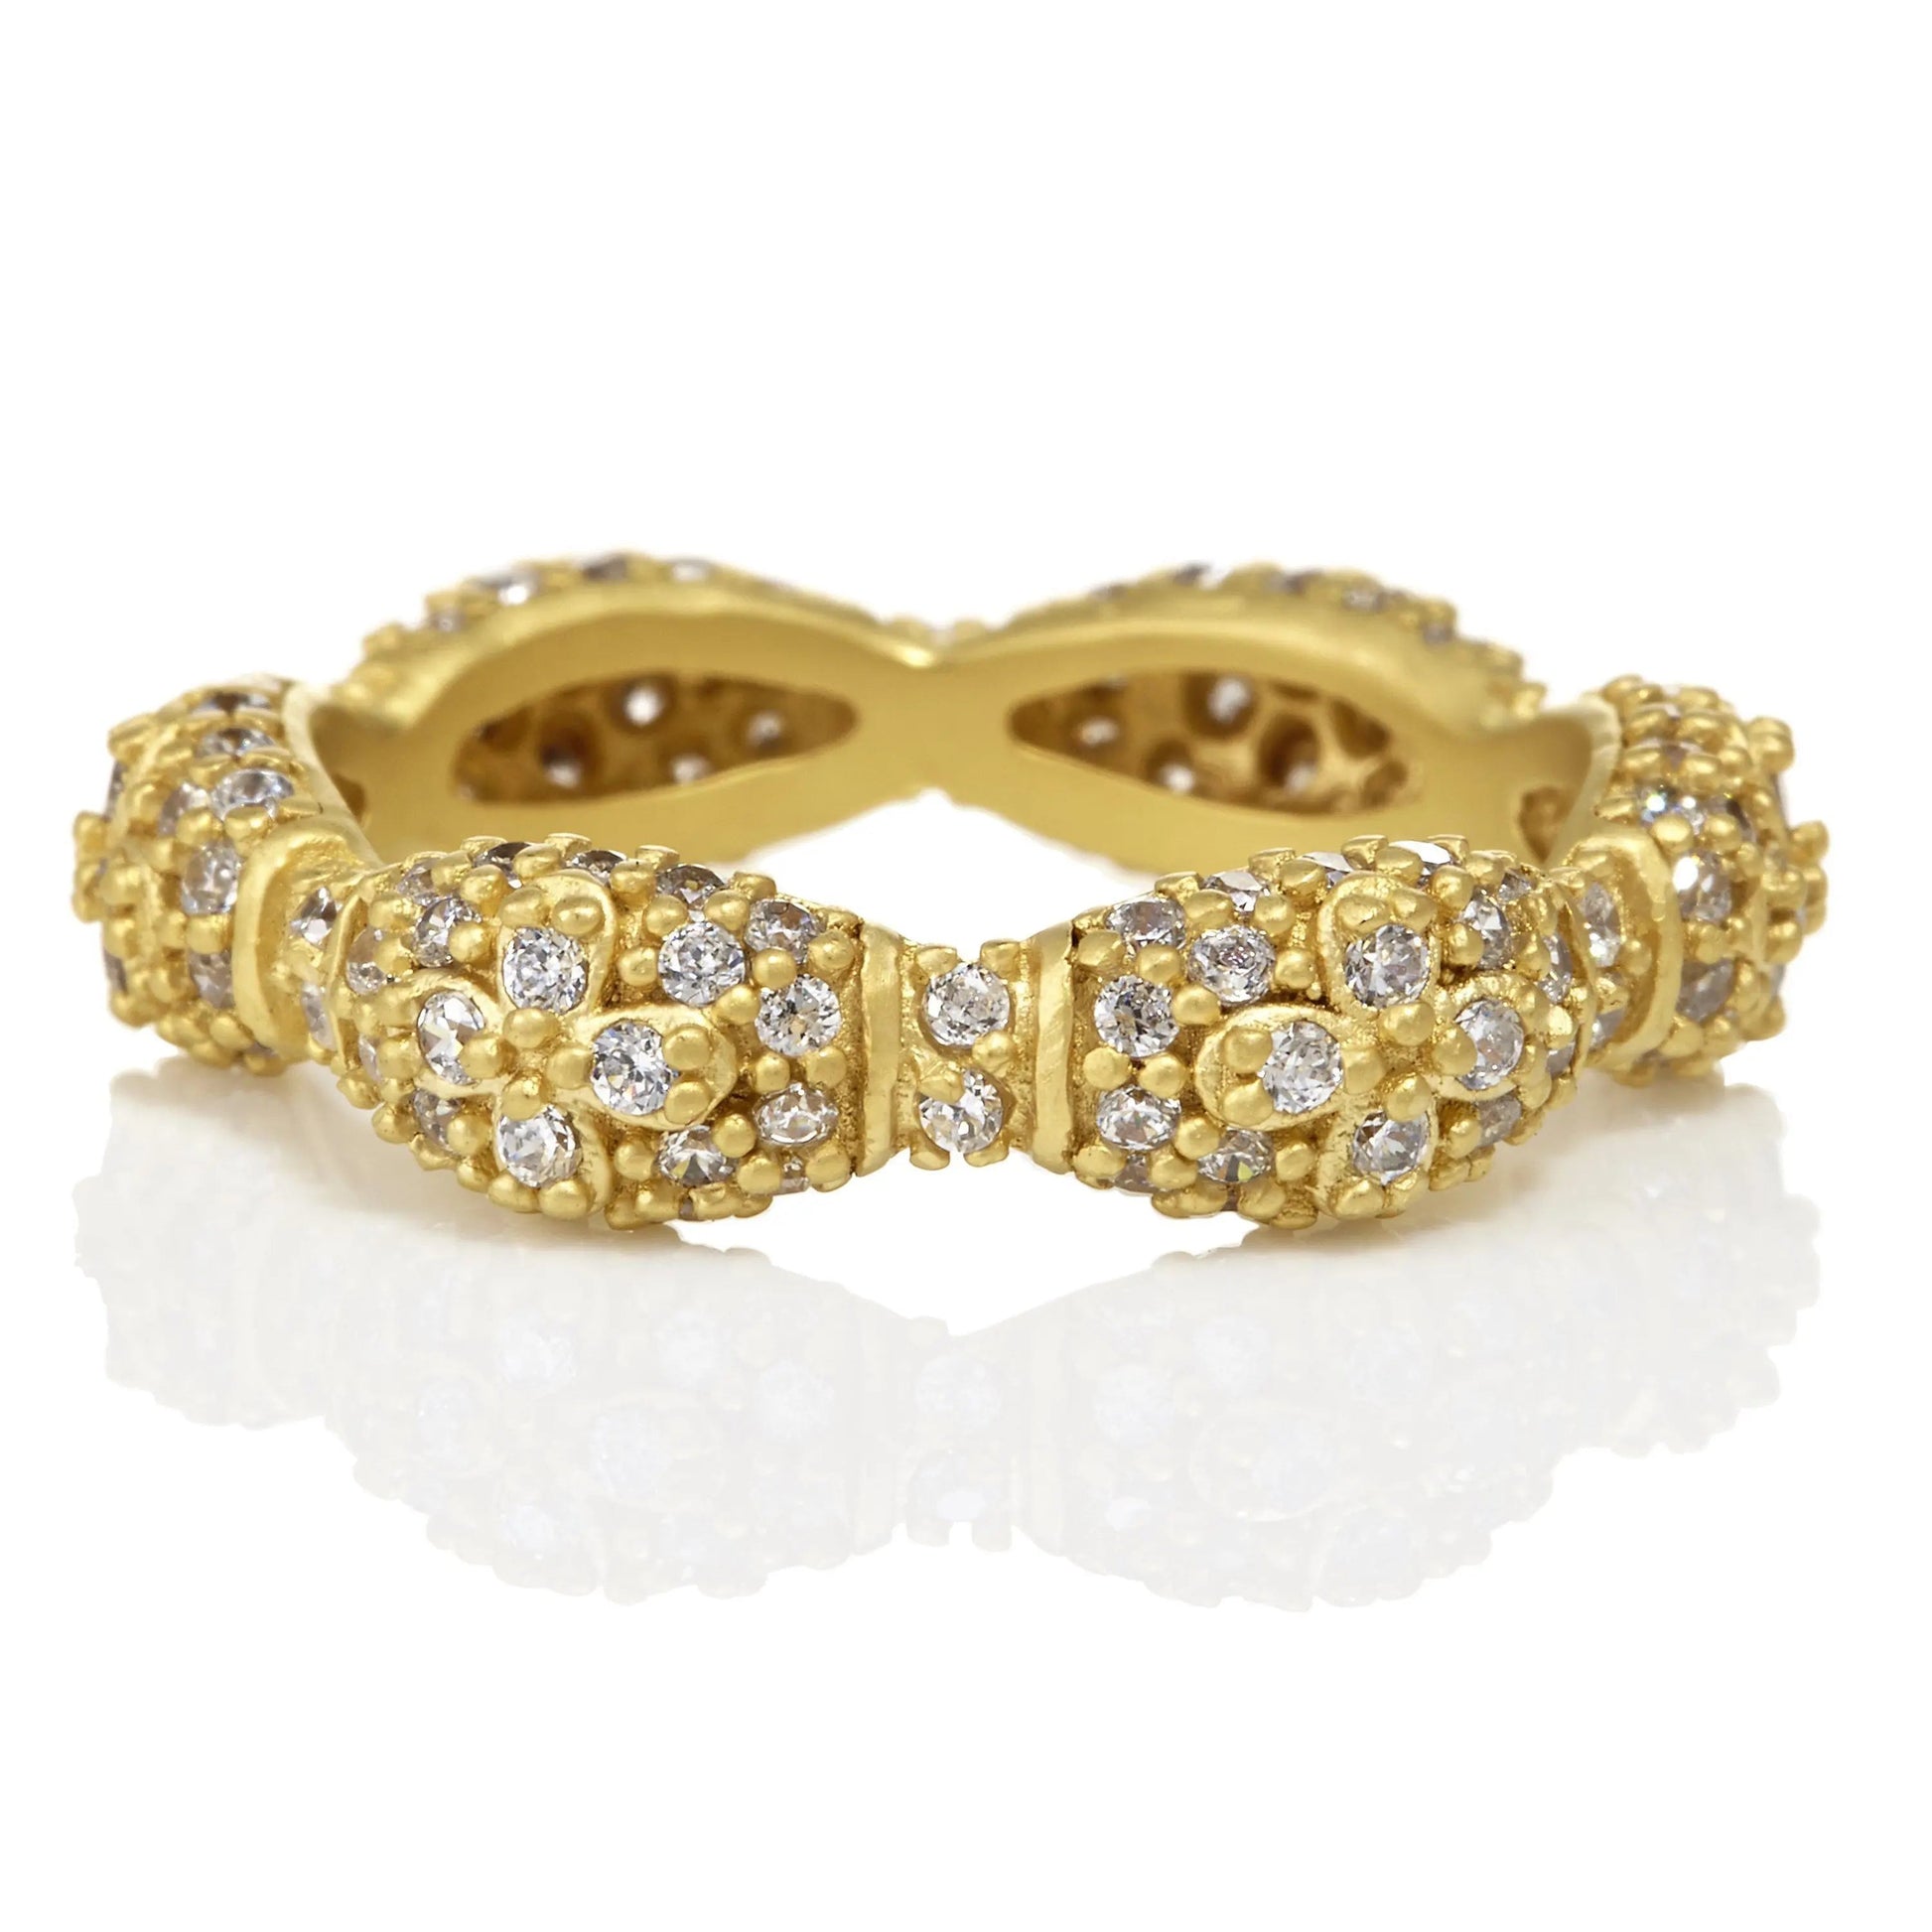 PAVÌä Marquise Domed Eternity Band Ring - FREIDA ROTHMAN